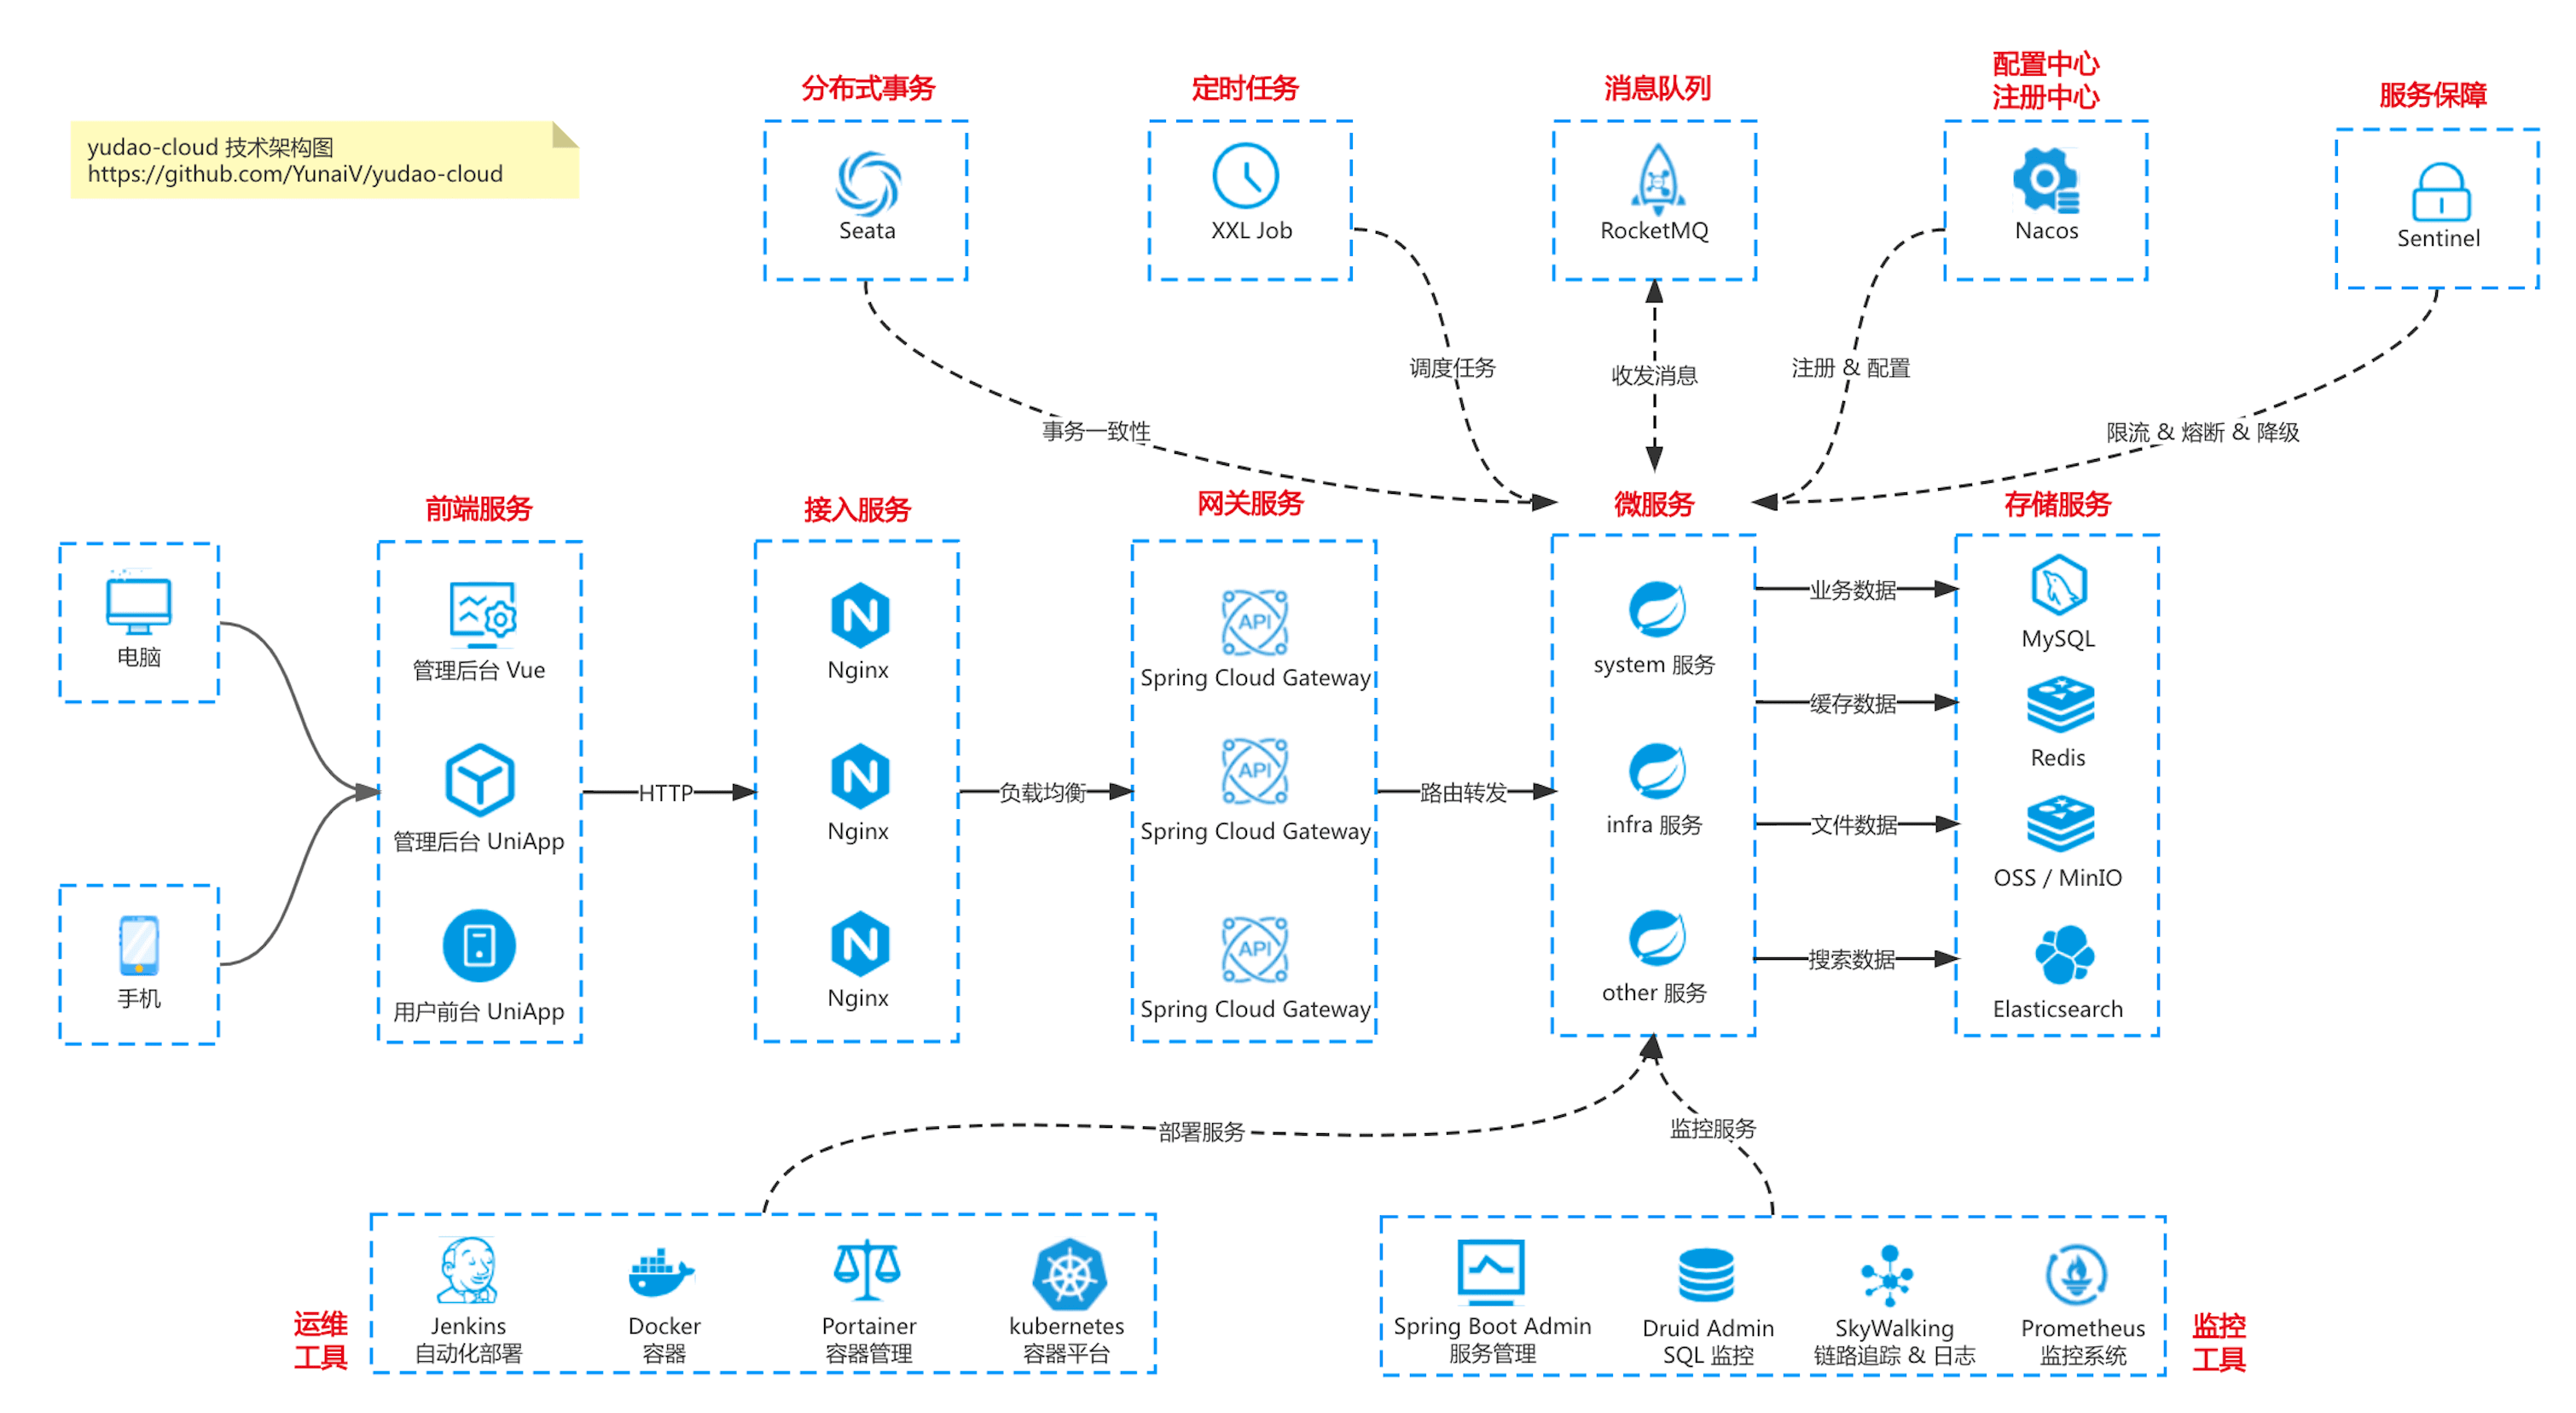 yudao-cloud-architecture.png